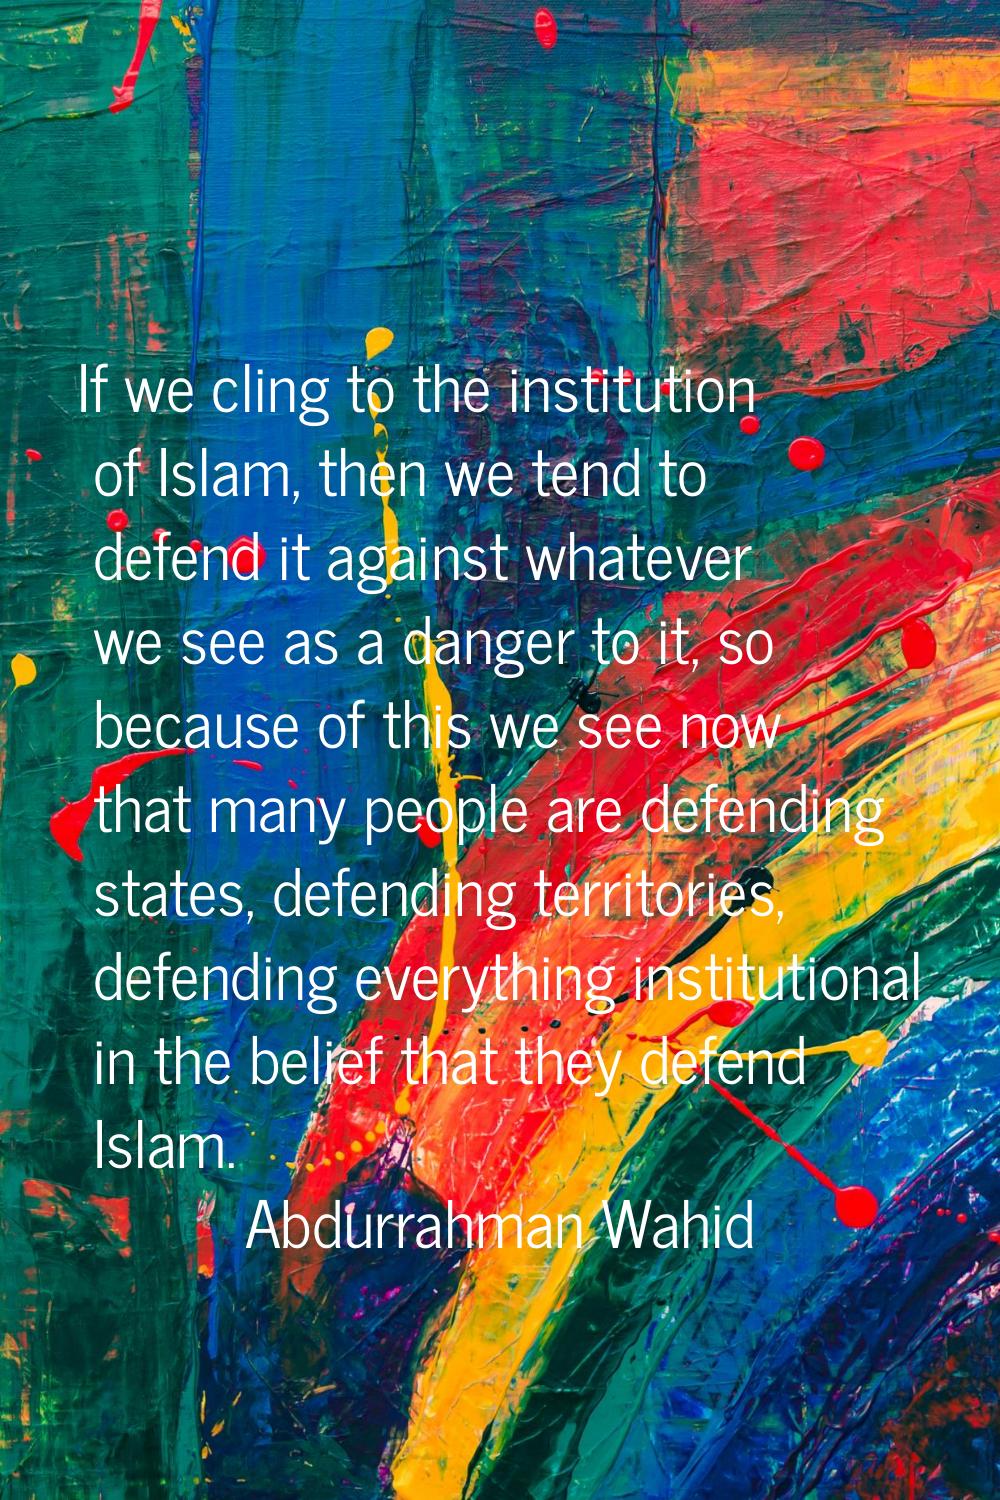 If we cling to the institution of Islam, then we tend to defend it against whatever we see as a dan